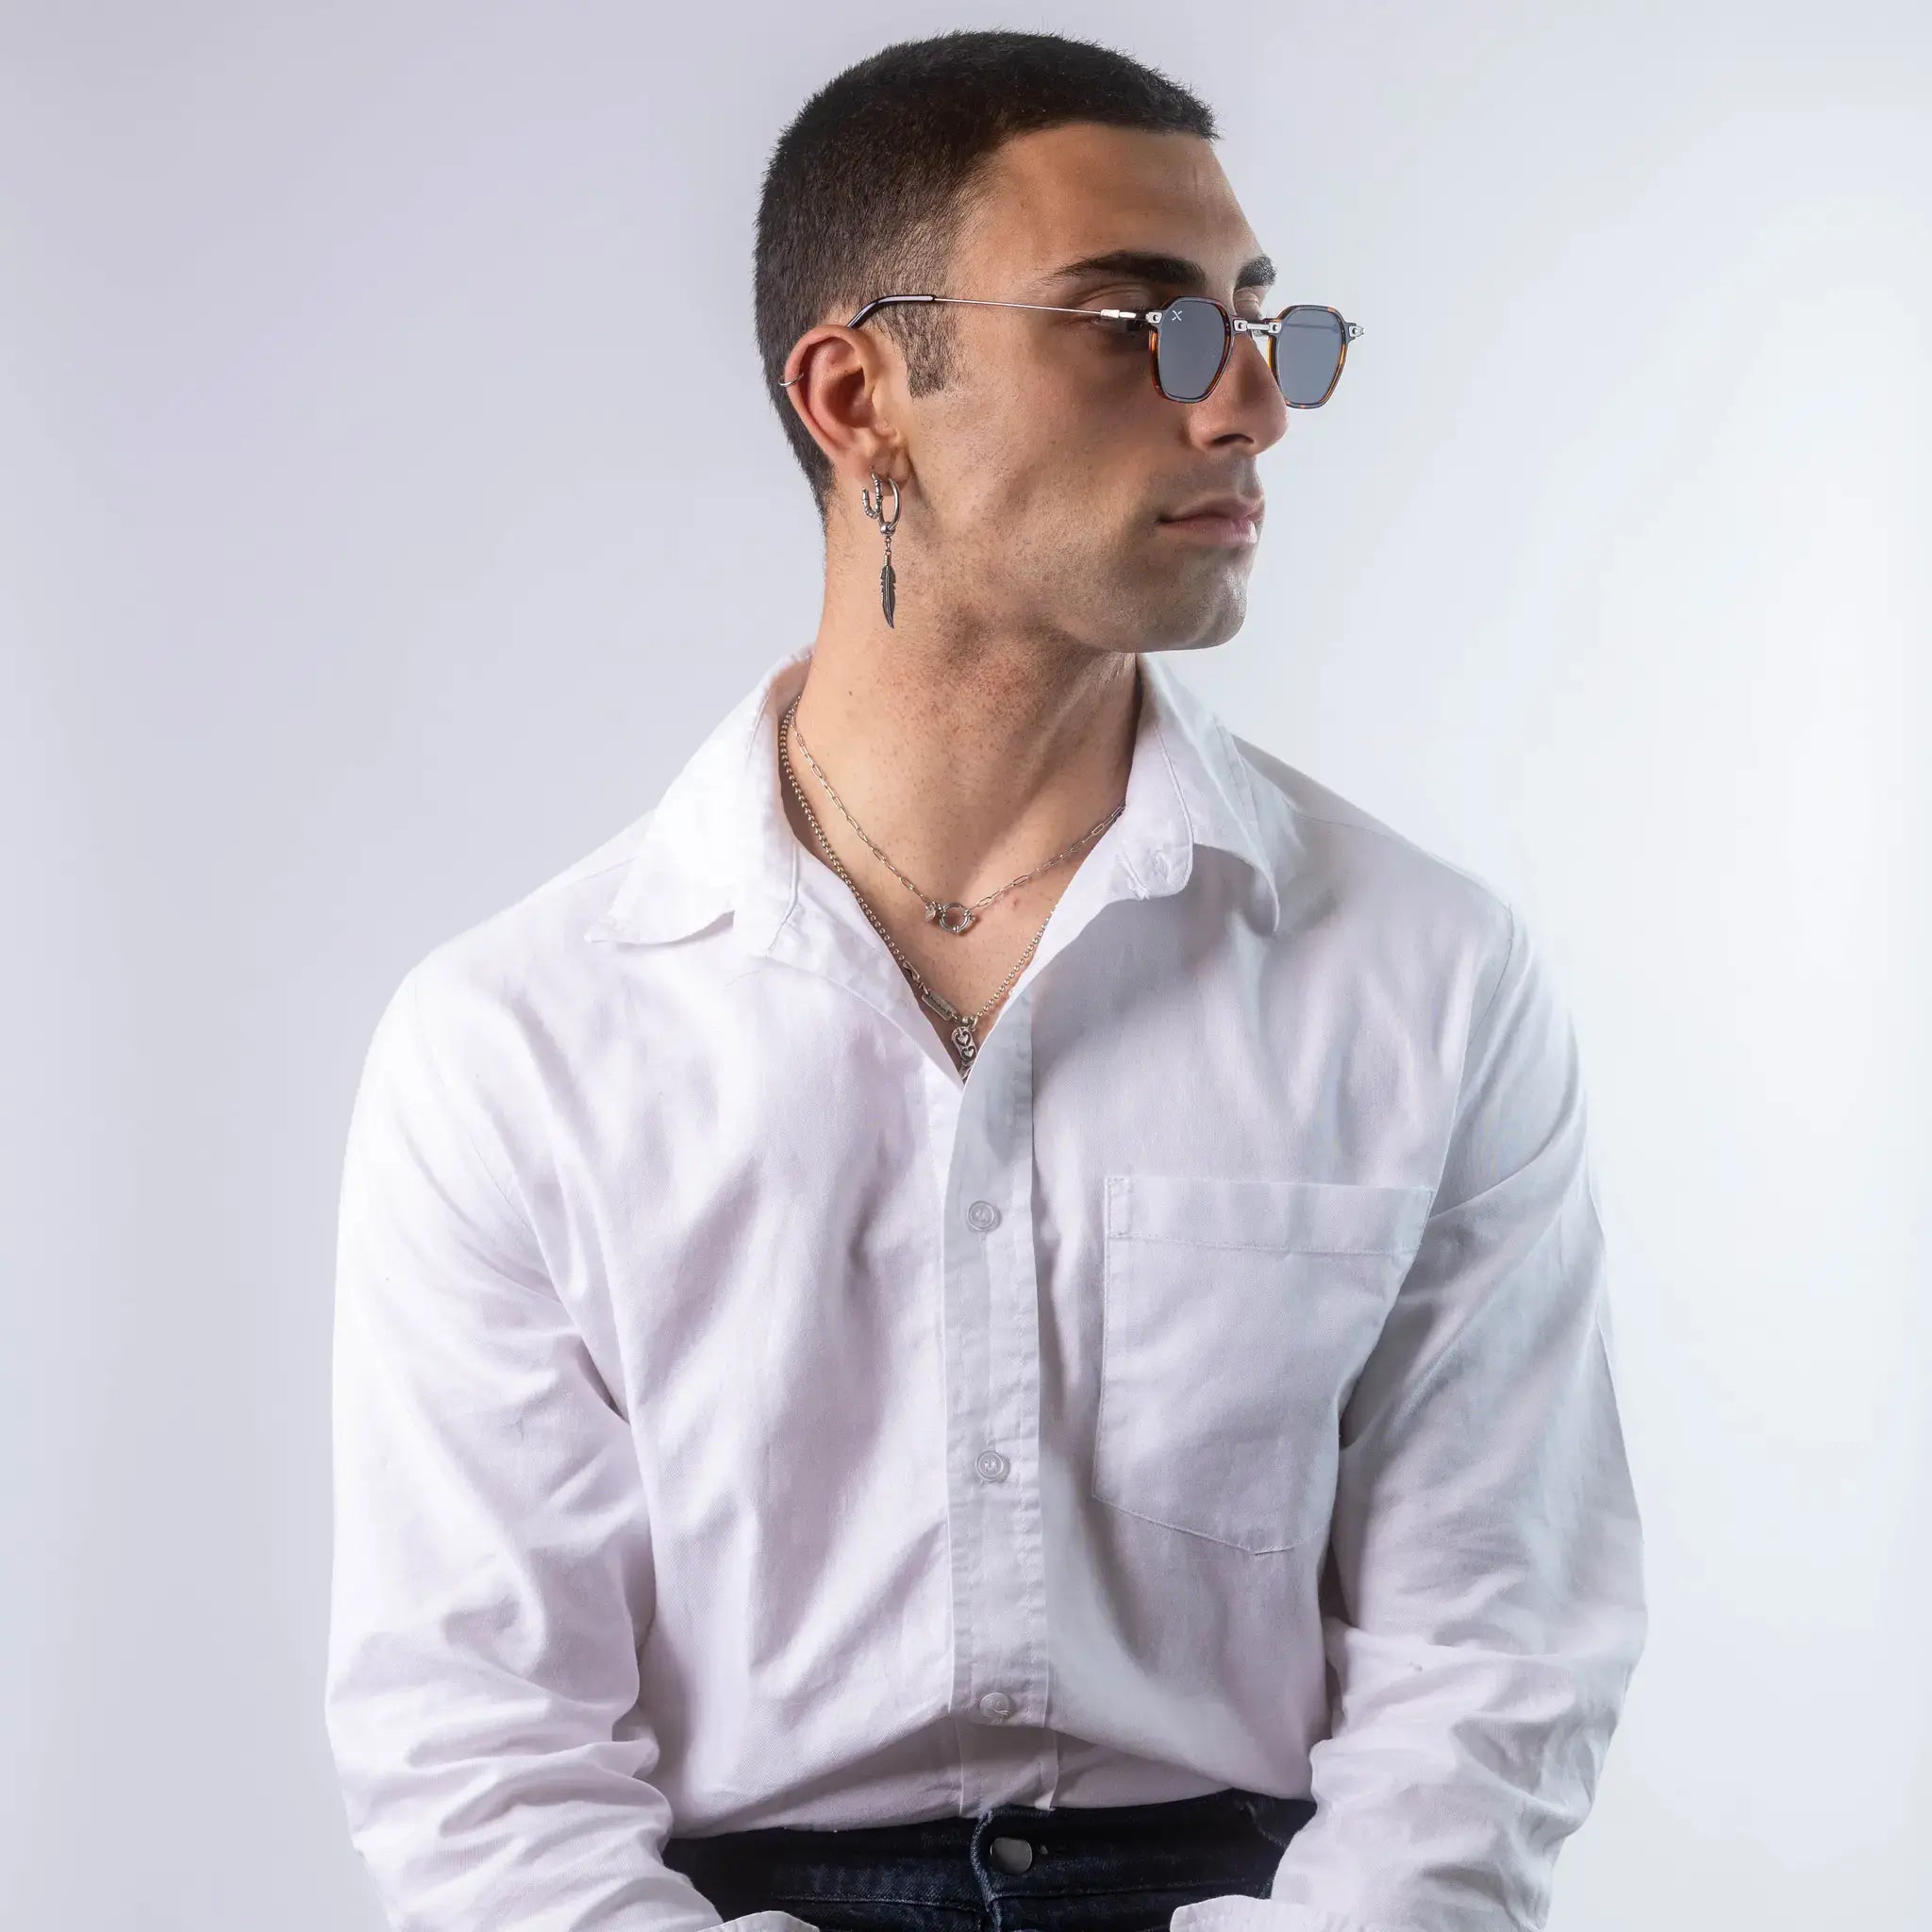 A male model wearing Exposure Sunglasses polarized sunglasses with silver frames and tinted lenses, posing against a white background.